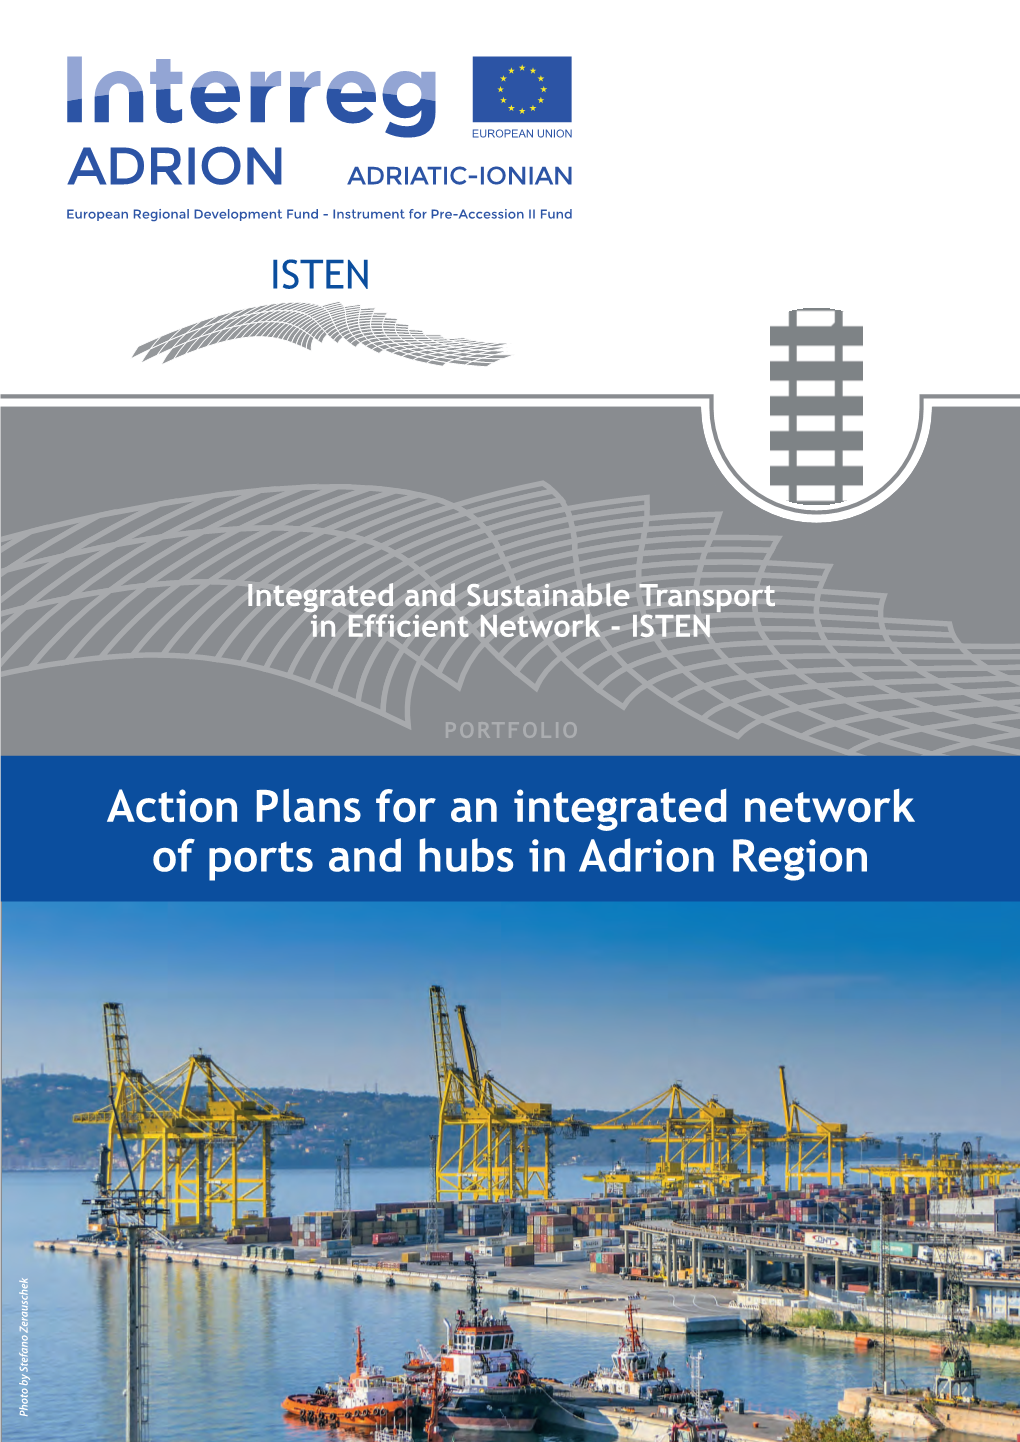 Action Plans for an Integrated Network of Ports and Hubs in Adrion Region